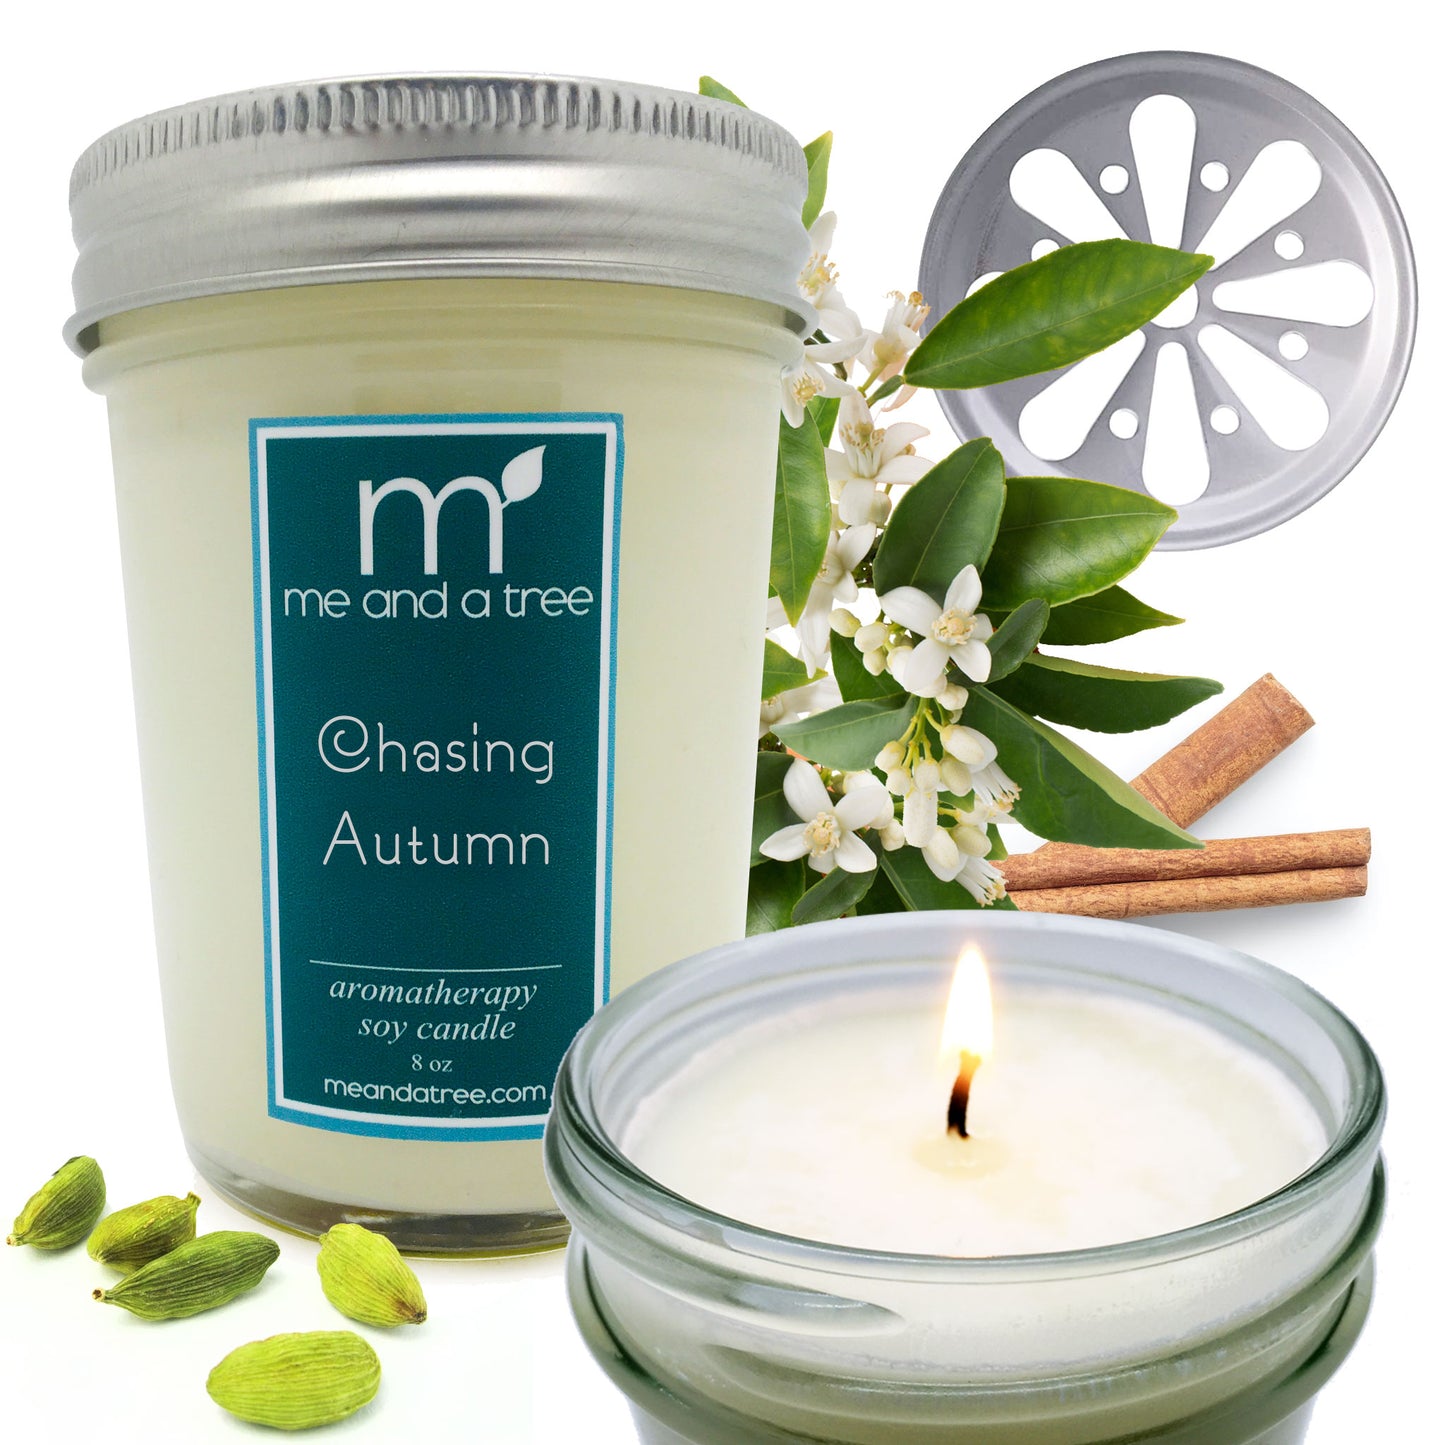 Best Chasing Autumn Soy essential oil 8oz jar candle with night time daisy lid, perfect for travel and gift-giving. Adds beautiful vibrancy to any room in your home, massage spa